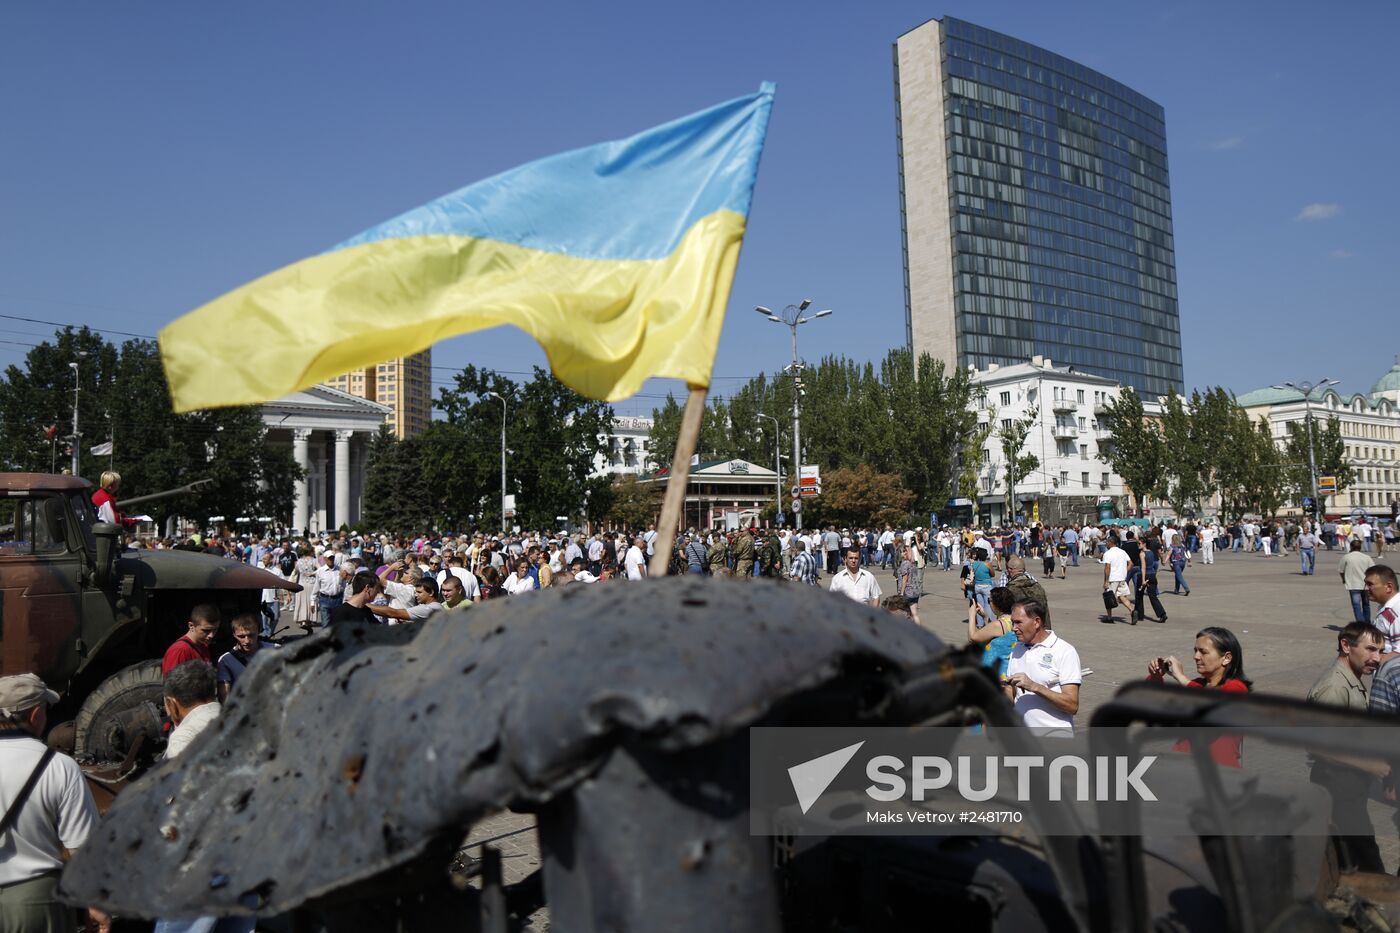 Event held in Donetsk on Ukraine's Independence Day